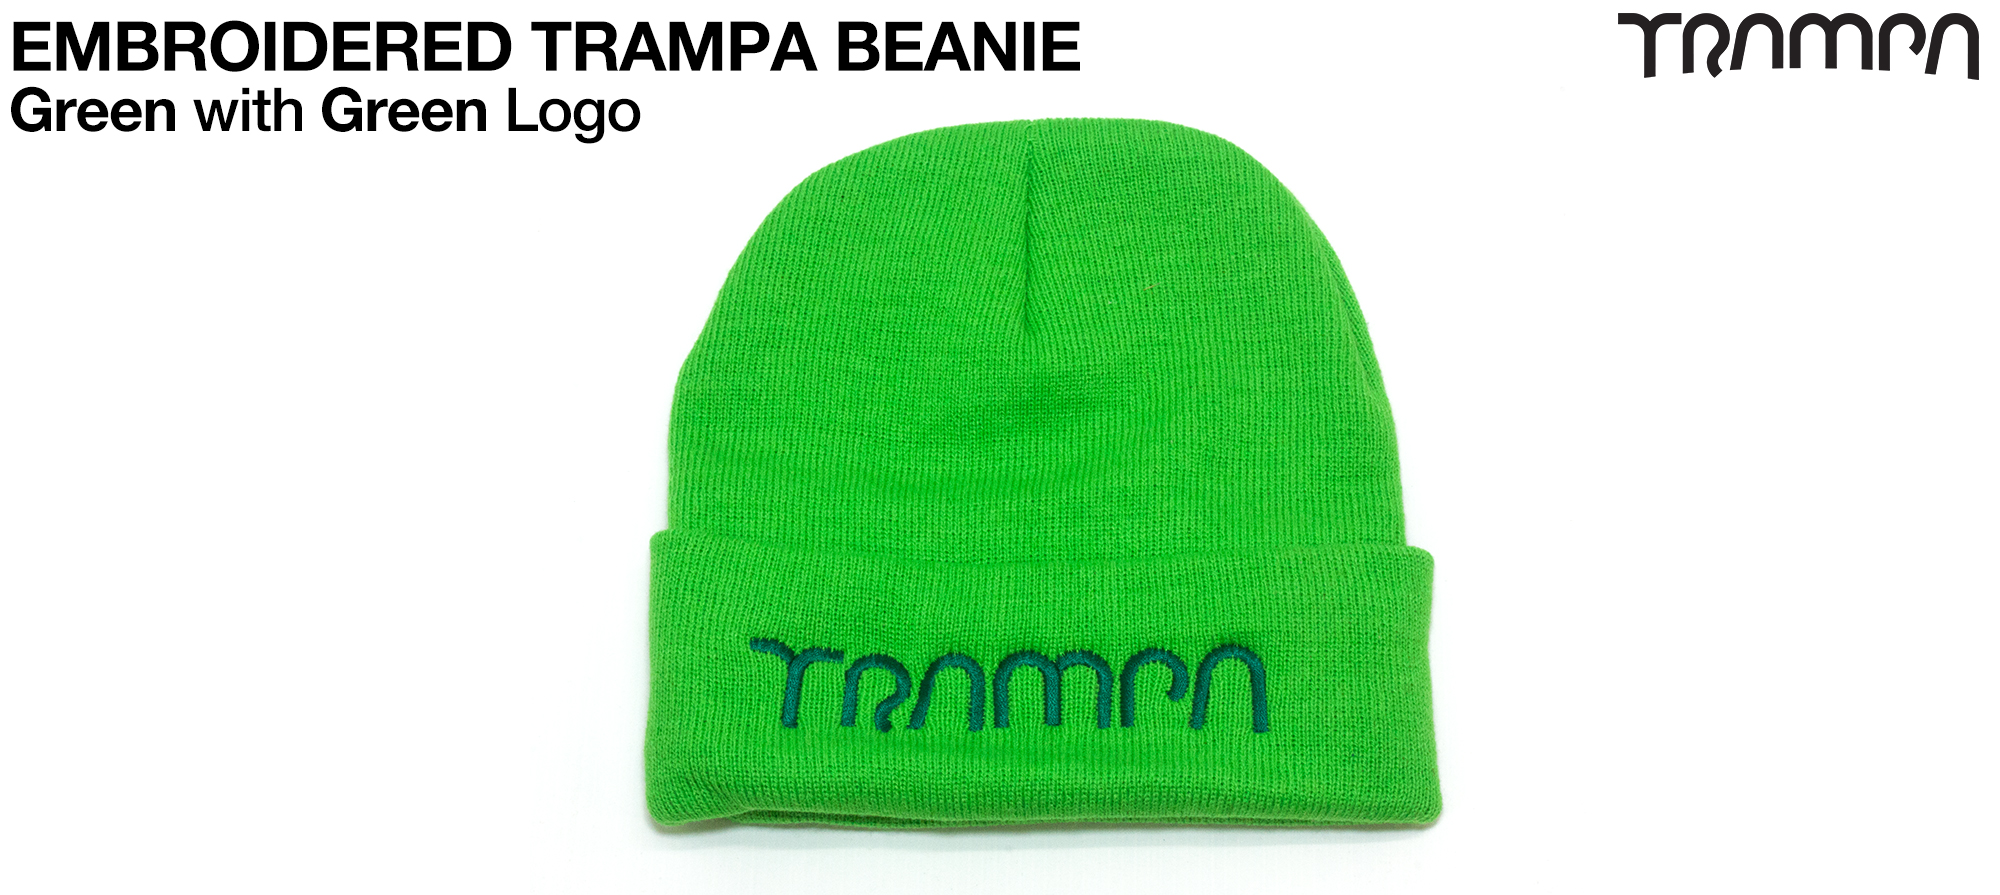 GREEN Beanie with EMBROIDERED TRAMPA logo 